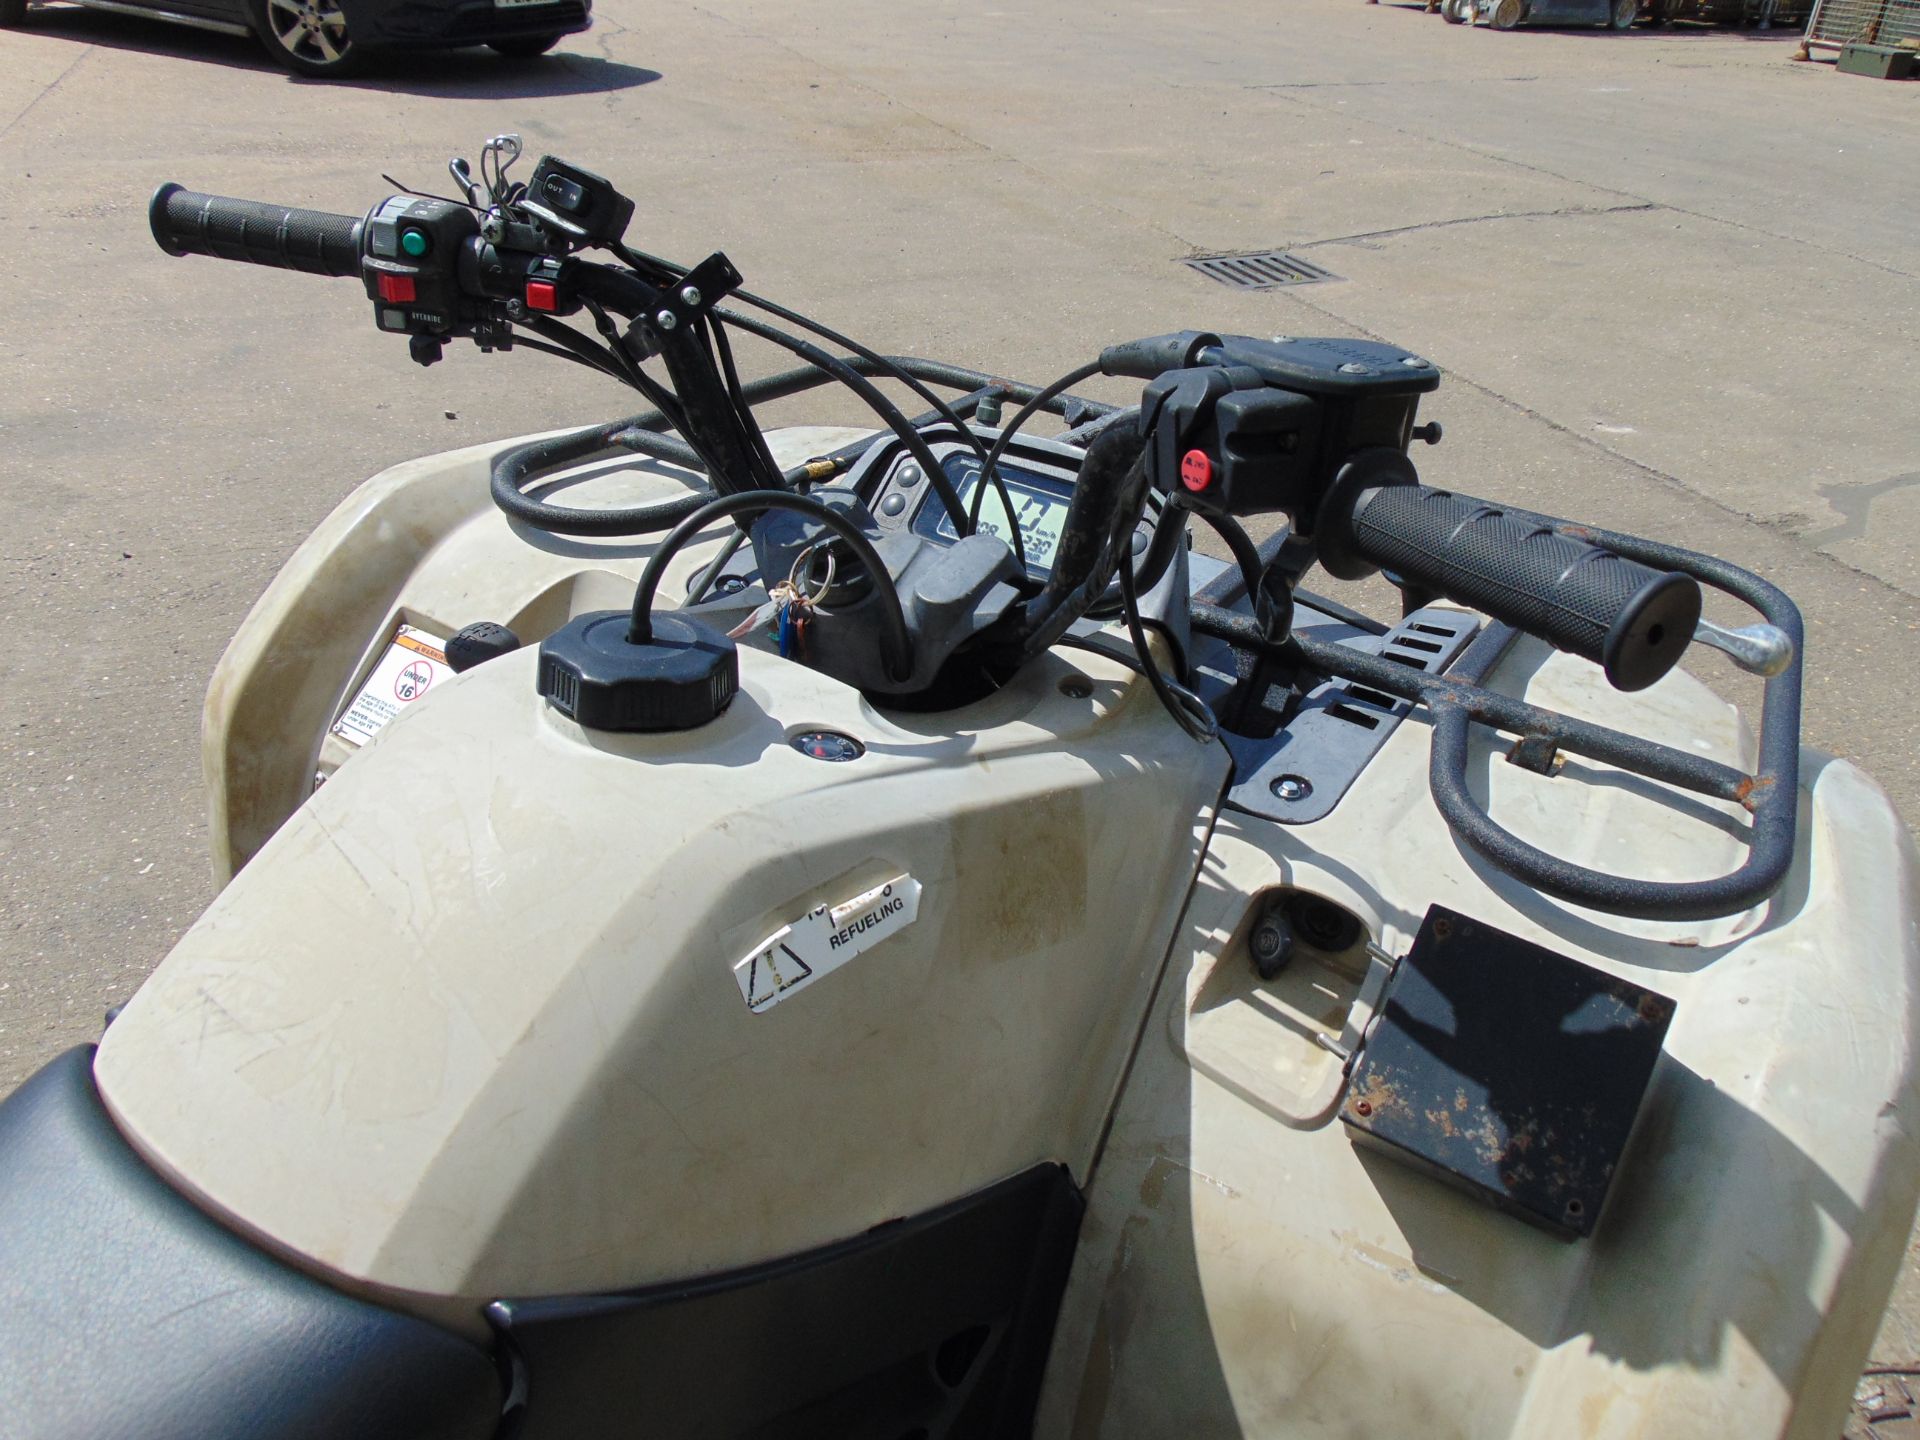 Military Specification Yamaha Grizzly 450 4 x 4 ATV Quad Bike Showing 223 hrs - Image 17 of 23